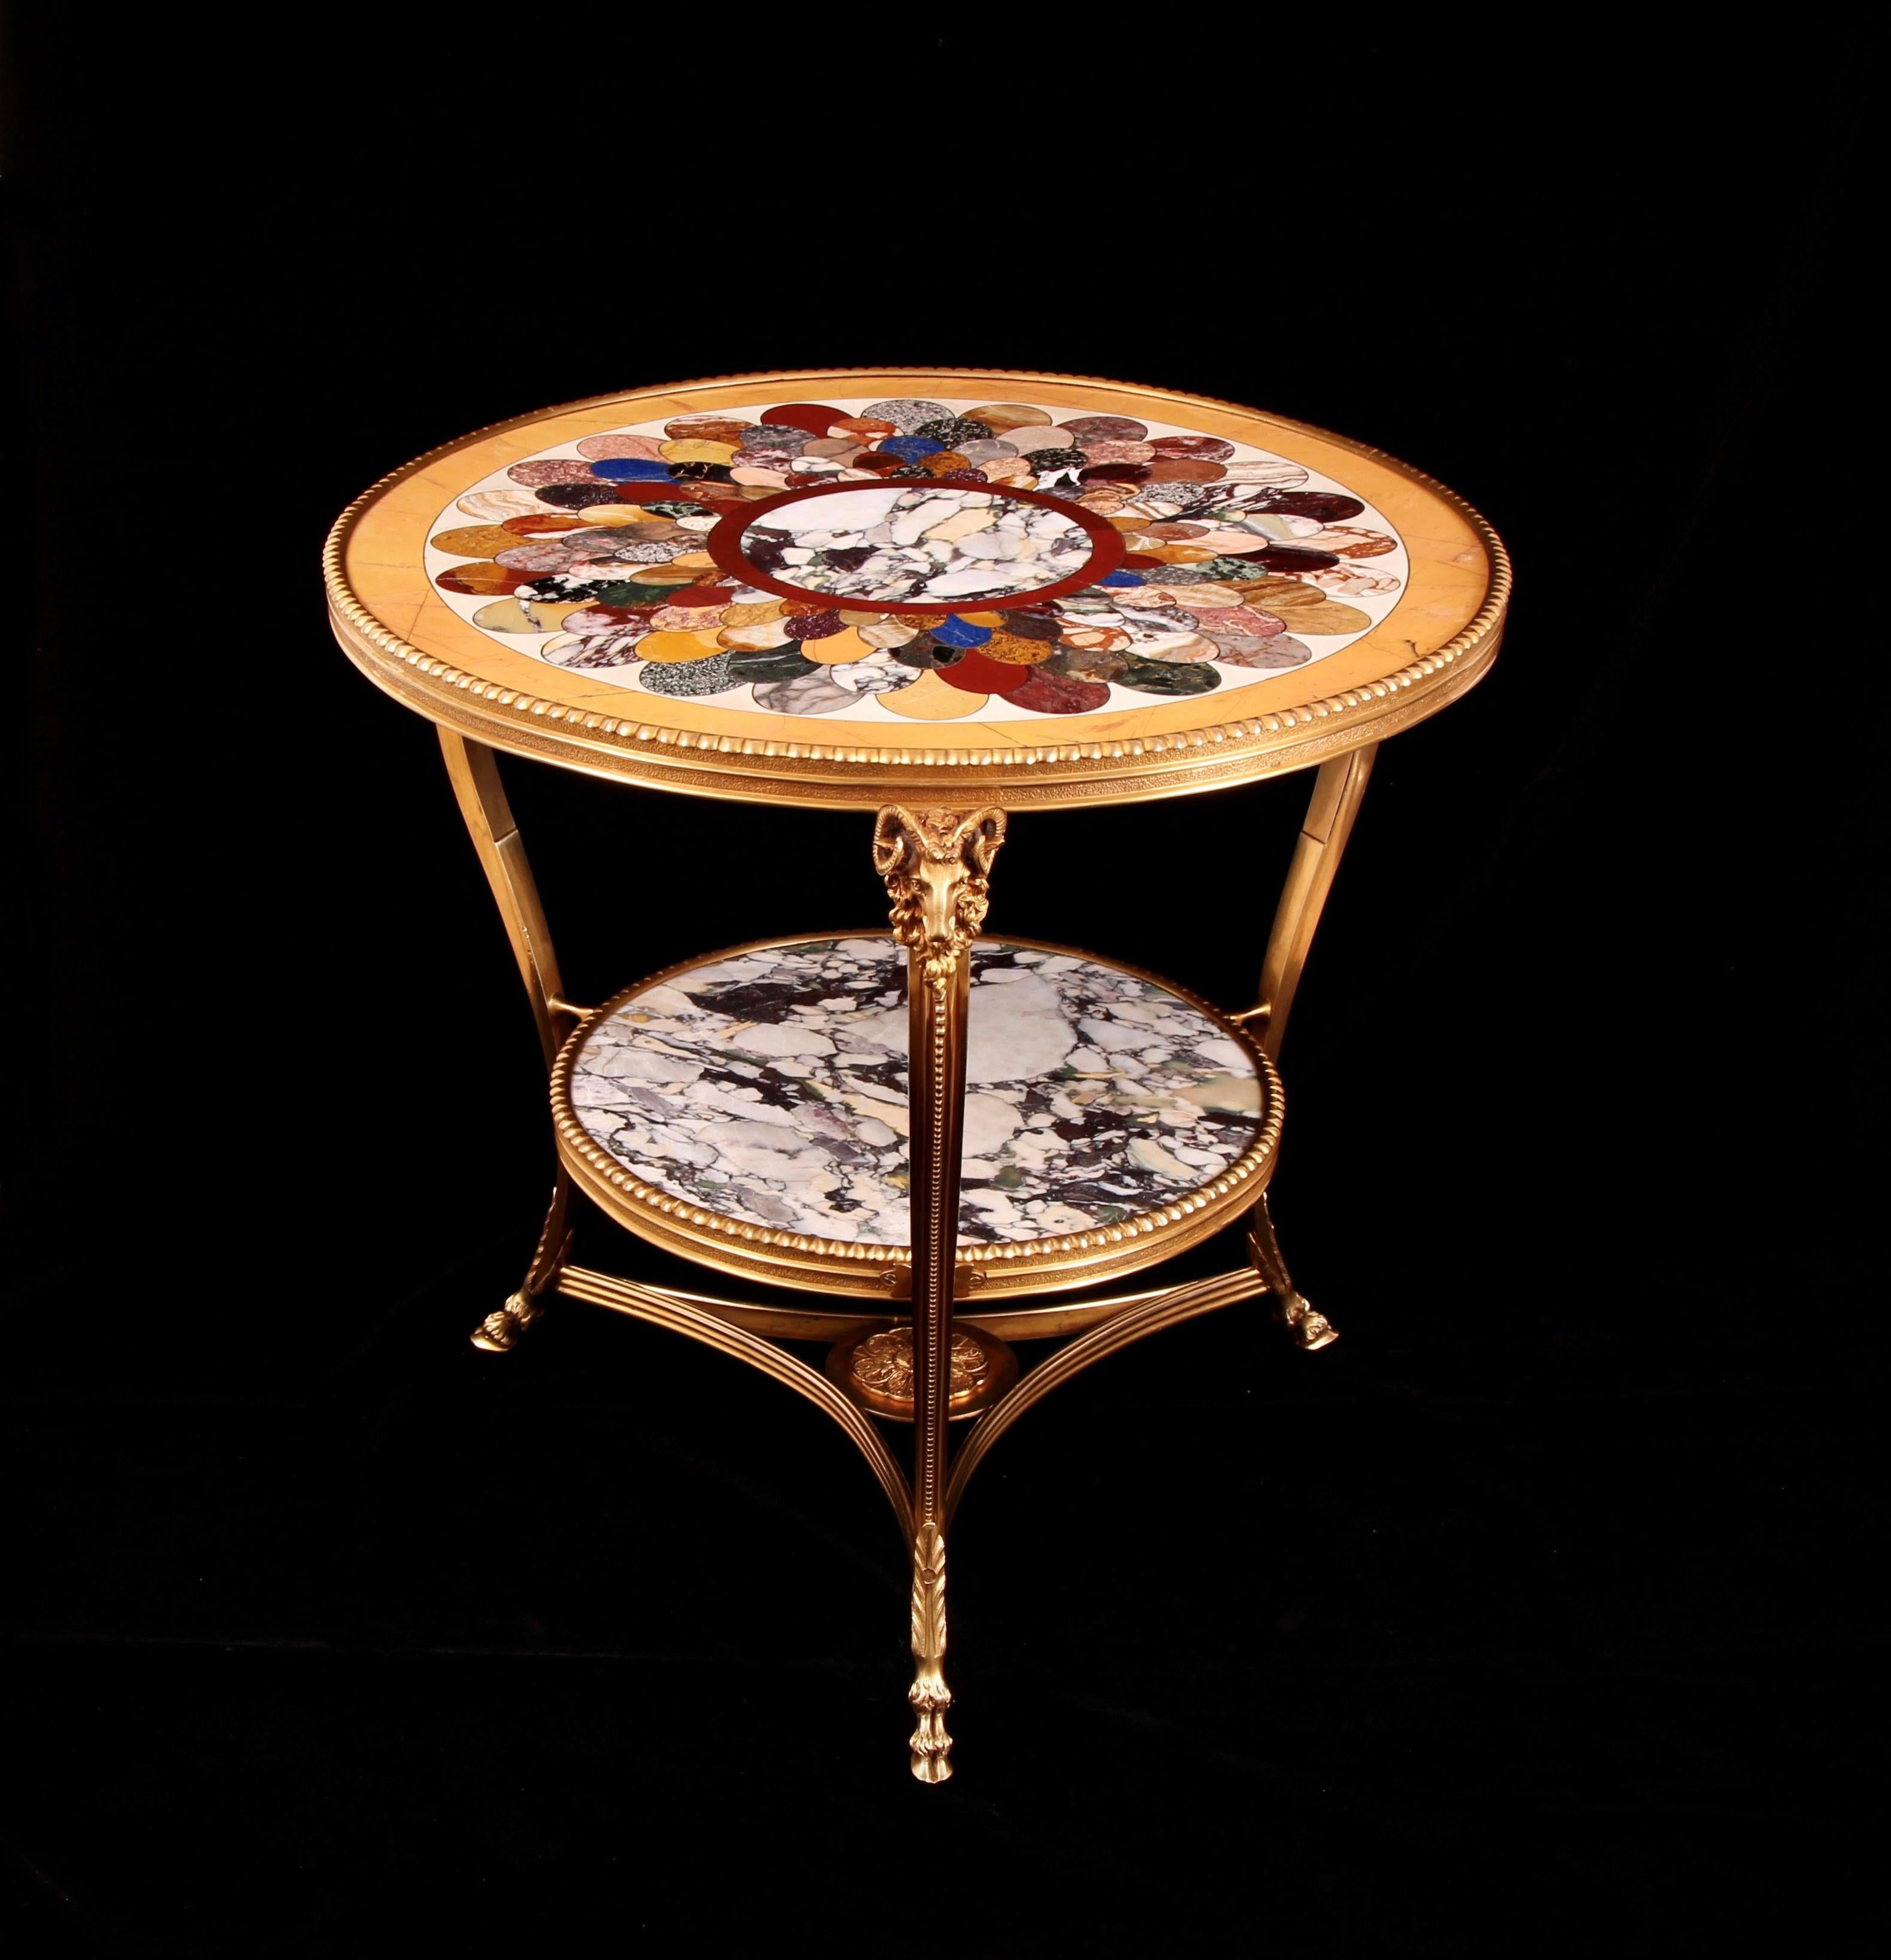 An early 20th century neoclassical masterpiece

Incorporating some of the World’s absolute rarest and most beautiful stones.

Rare early 20th century specimen marble & semi precious stone gilt bronze Centre Table / Gueridon. The rarity of the